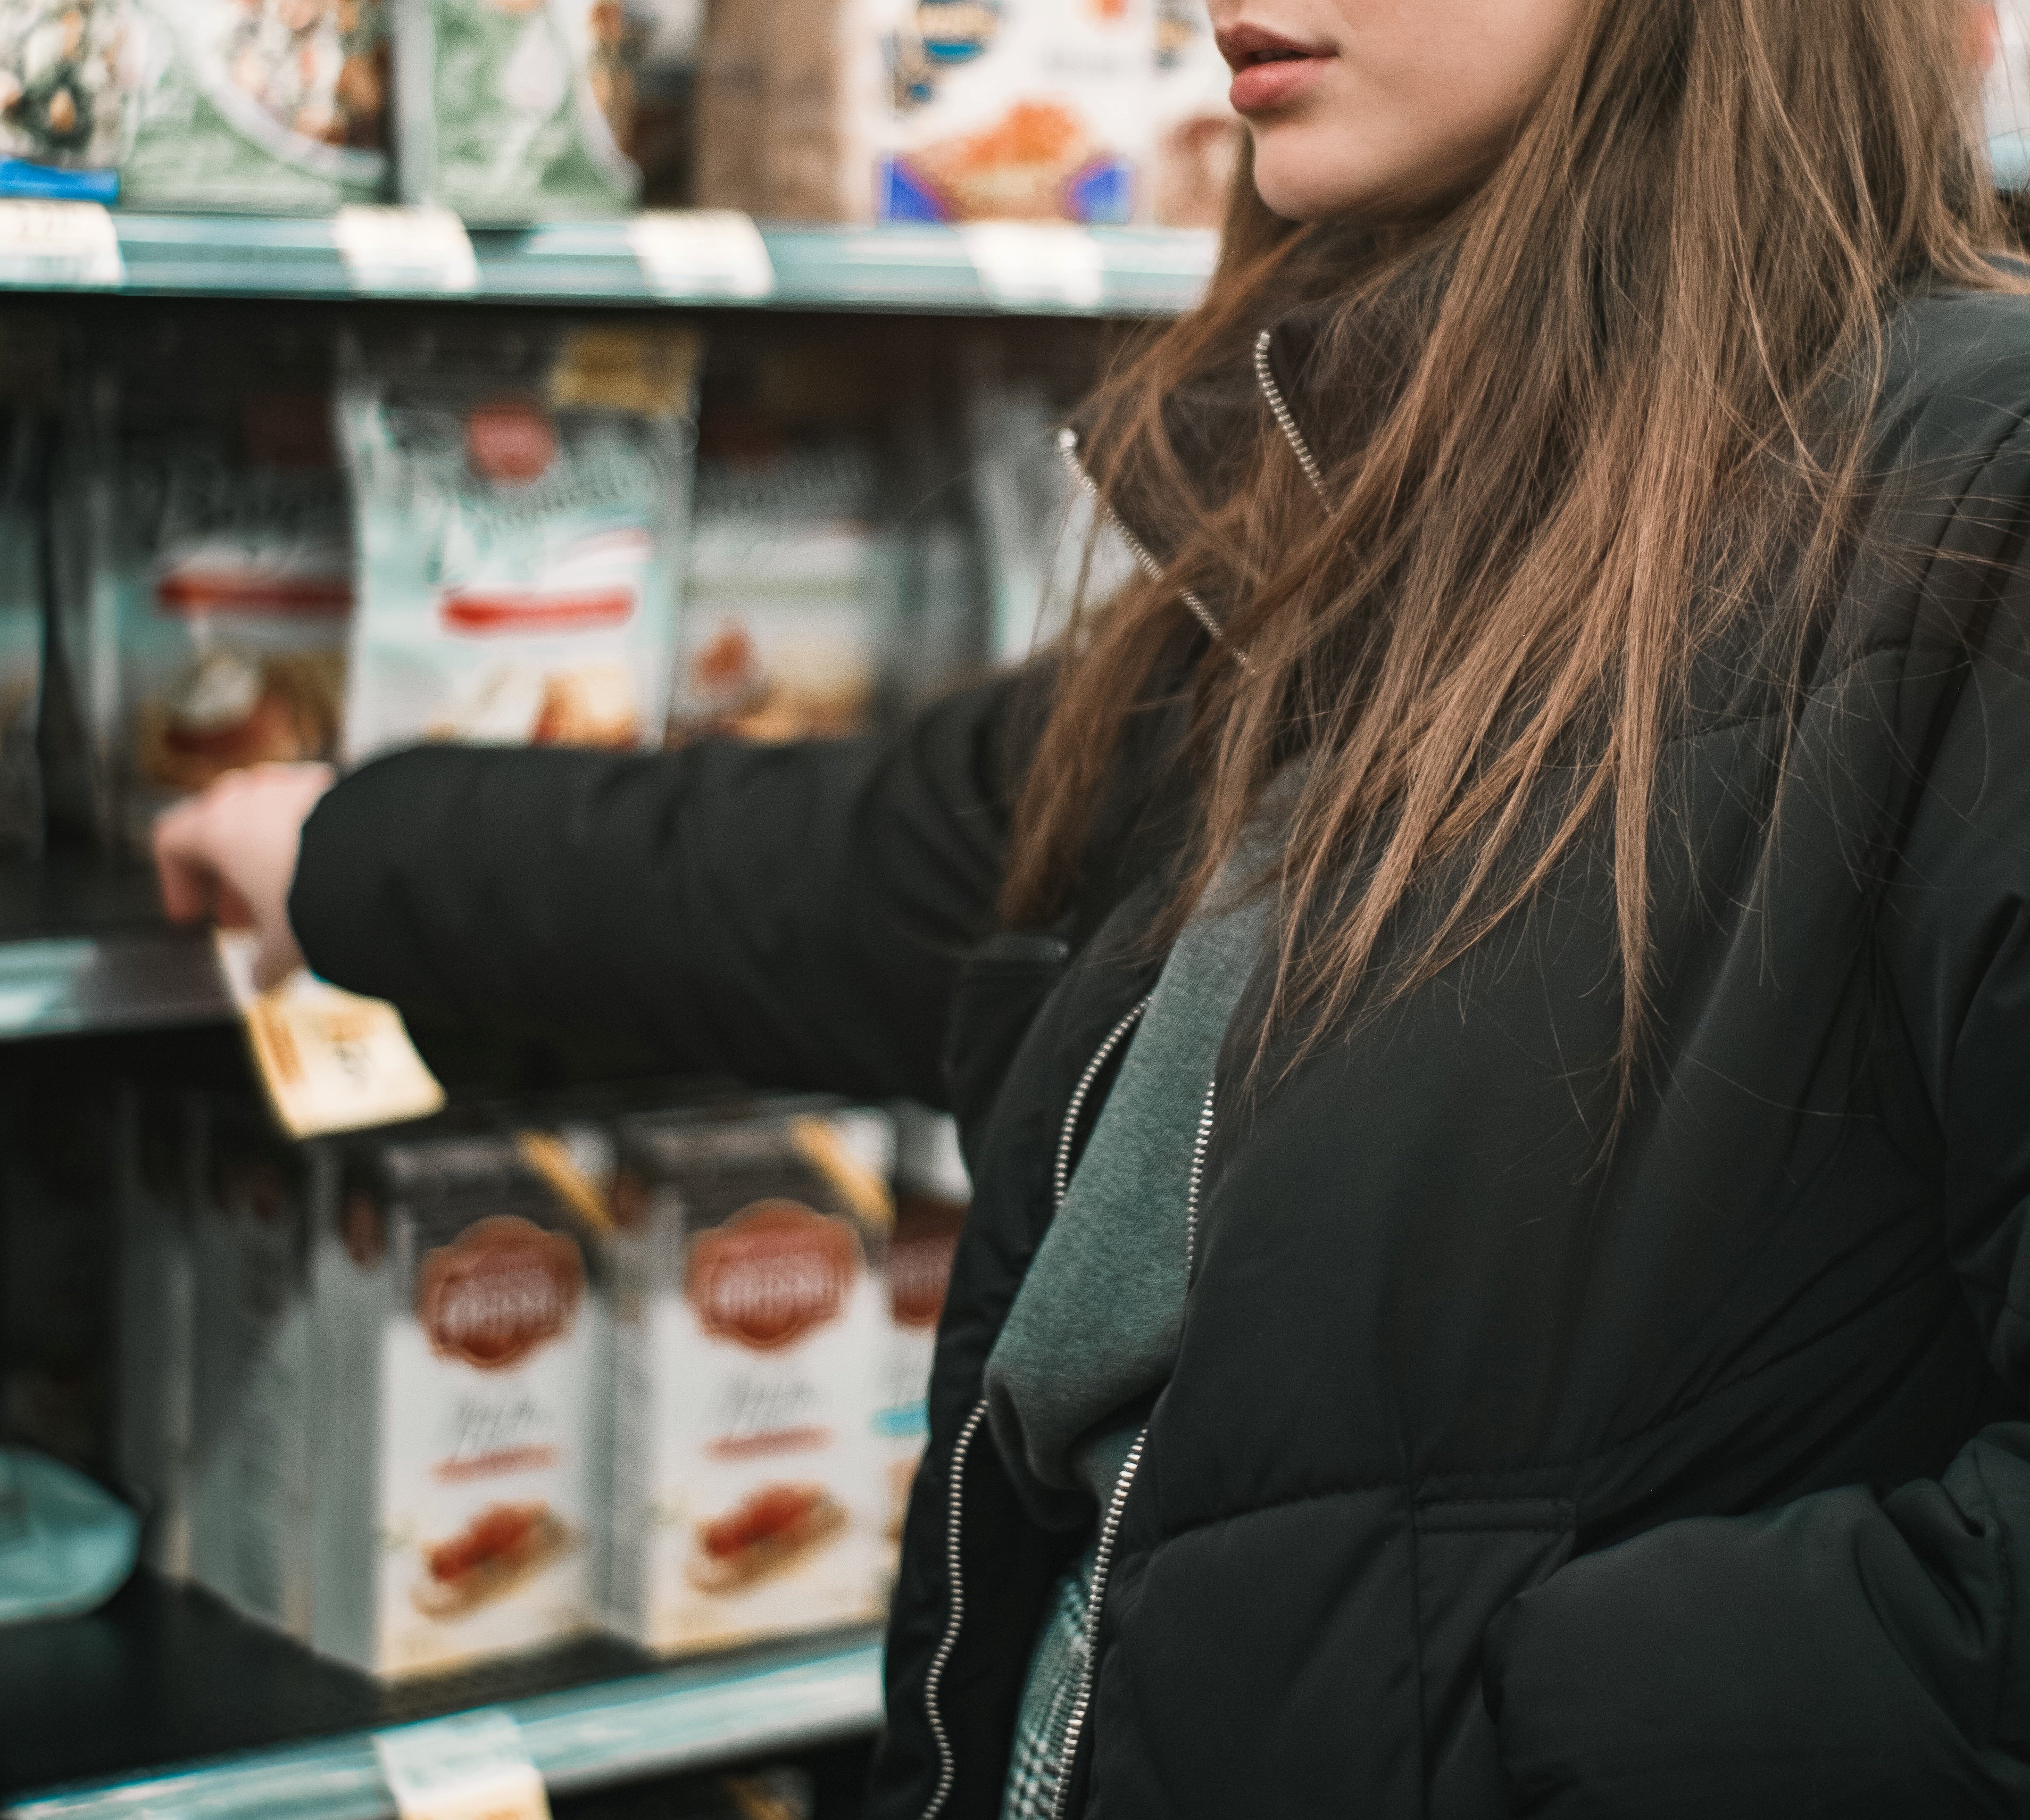 One day, Linda was caught shoplifting at a supermarket. | Source: Unsplash